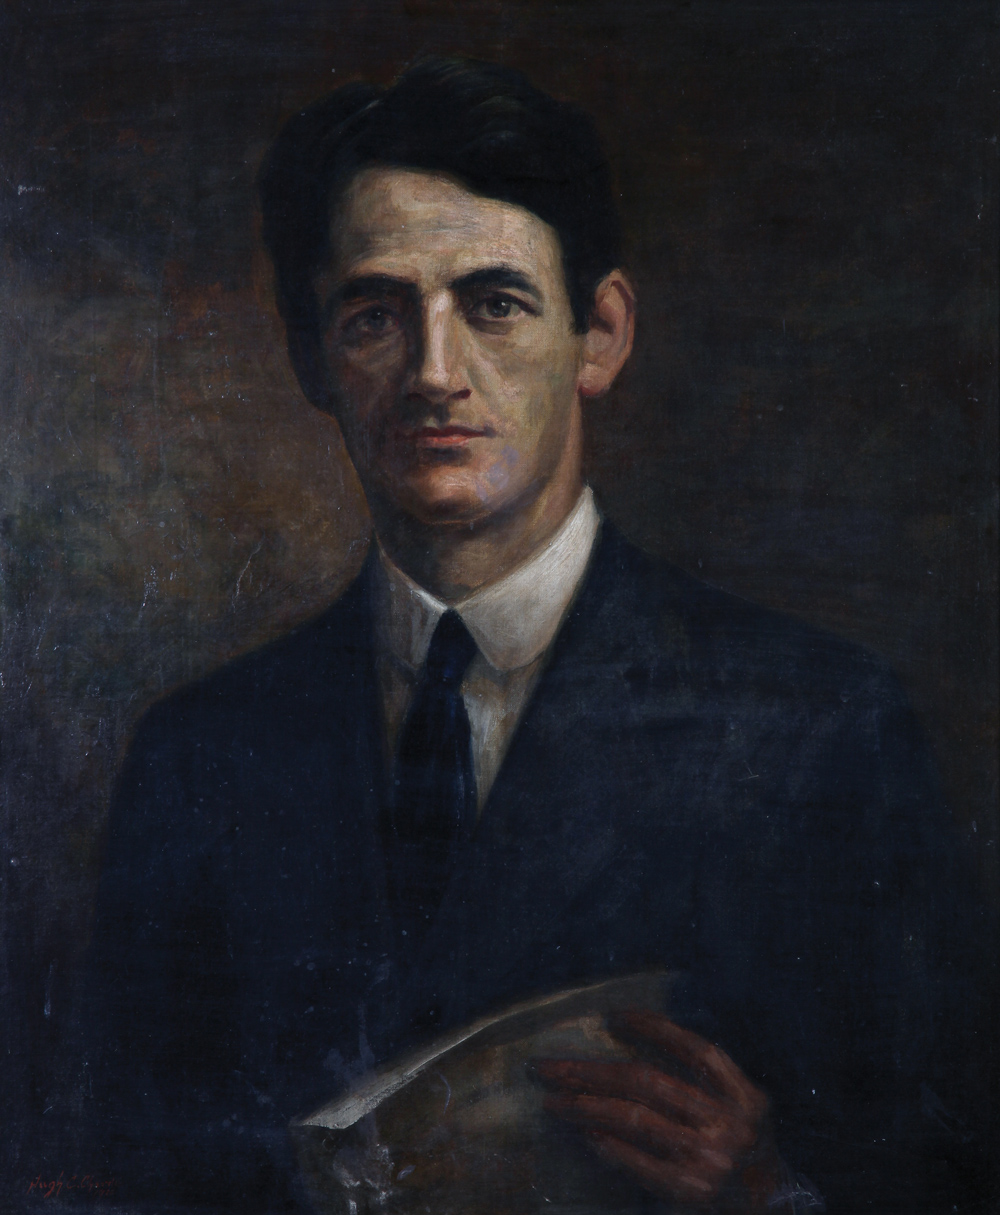 Hugh C. Charde, Portrait of Terence MacSwiney, Lord Mayor of Cork, 1920, oil on canvas, Crawford Art Gallery